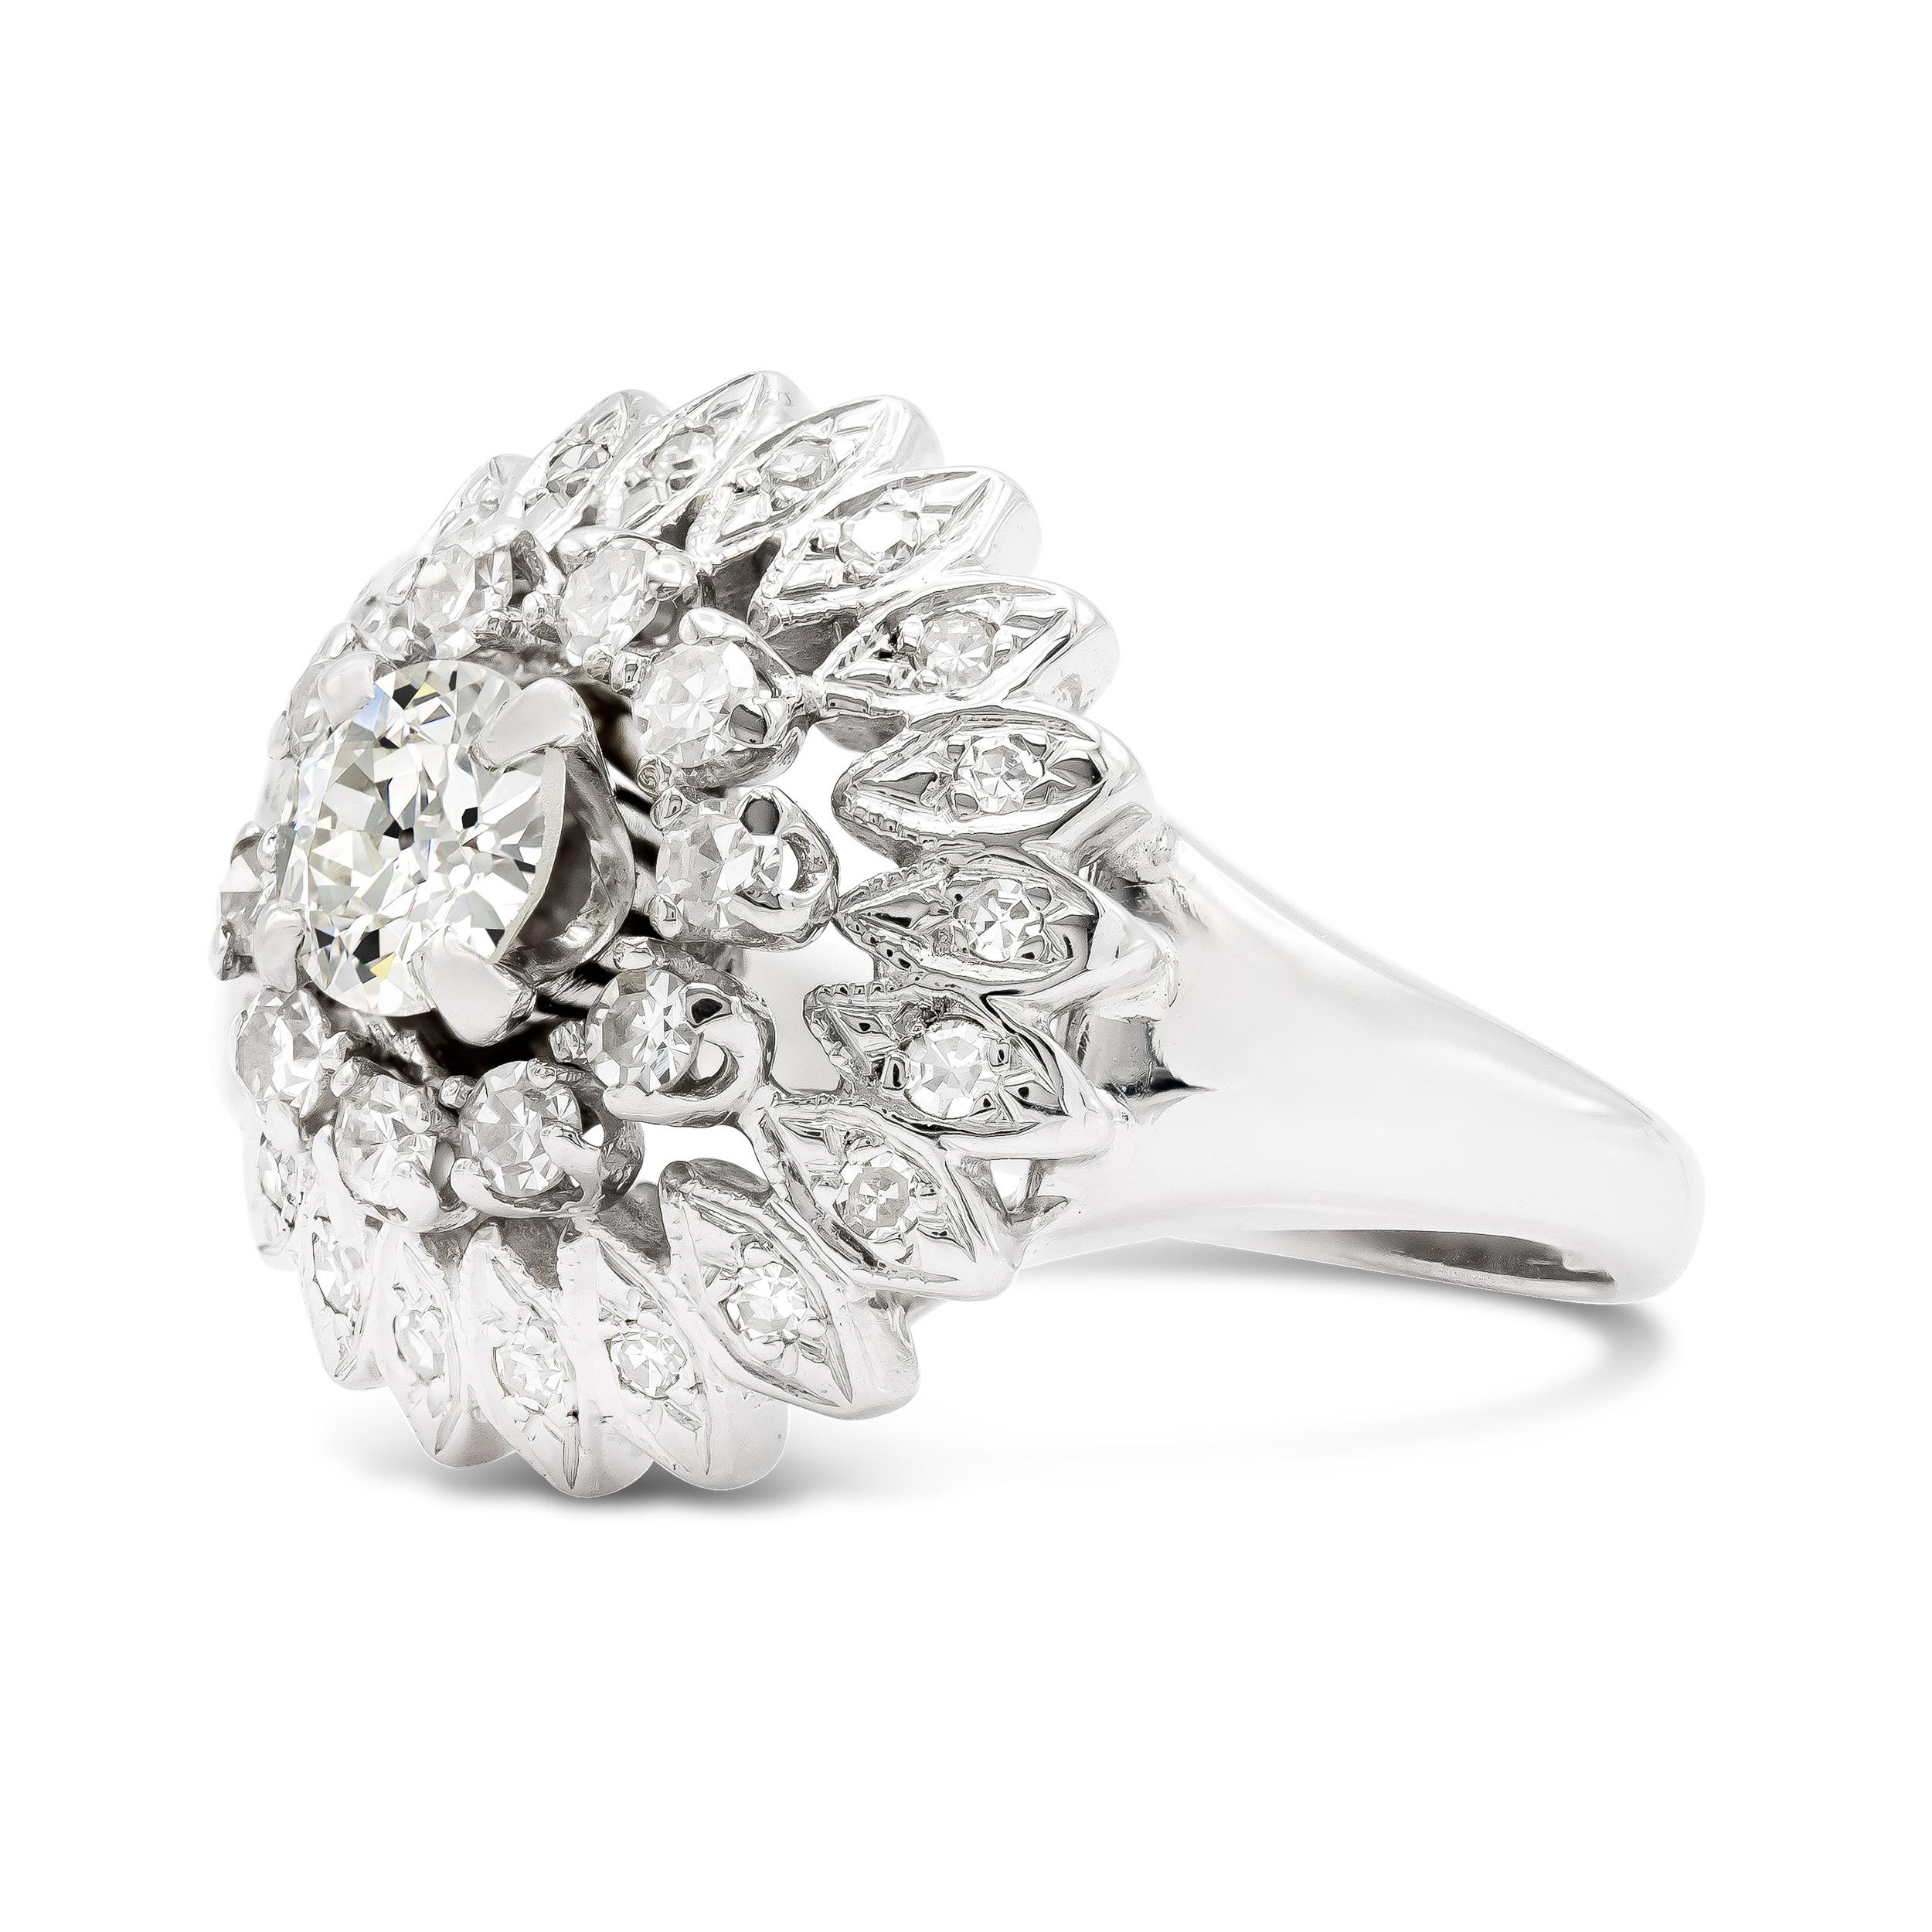 Here's an art deco cluster ring that stands out. Its sparkling tiered design is topped with a half-carat old European cut diamond that shines bright, set among graduated single cuts in 18kt white gold. We love the marquise metalwork accents and all